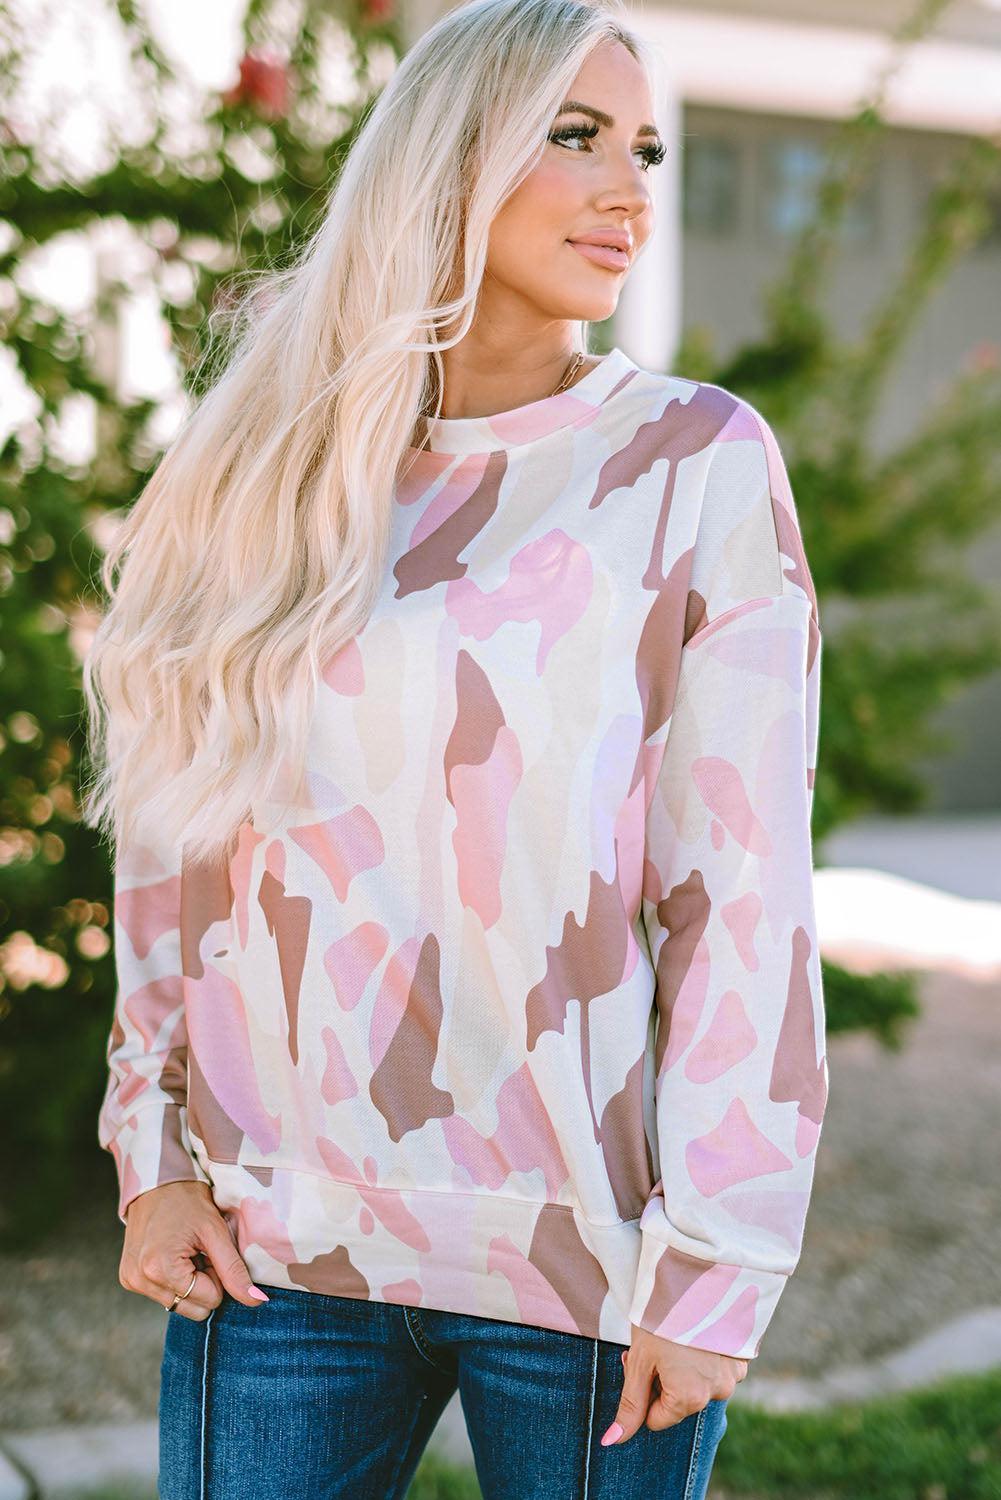 a woman wearing a pink camouflage sweater